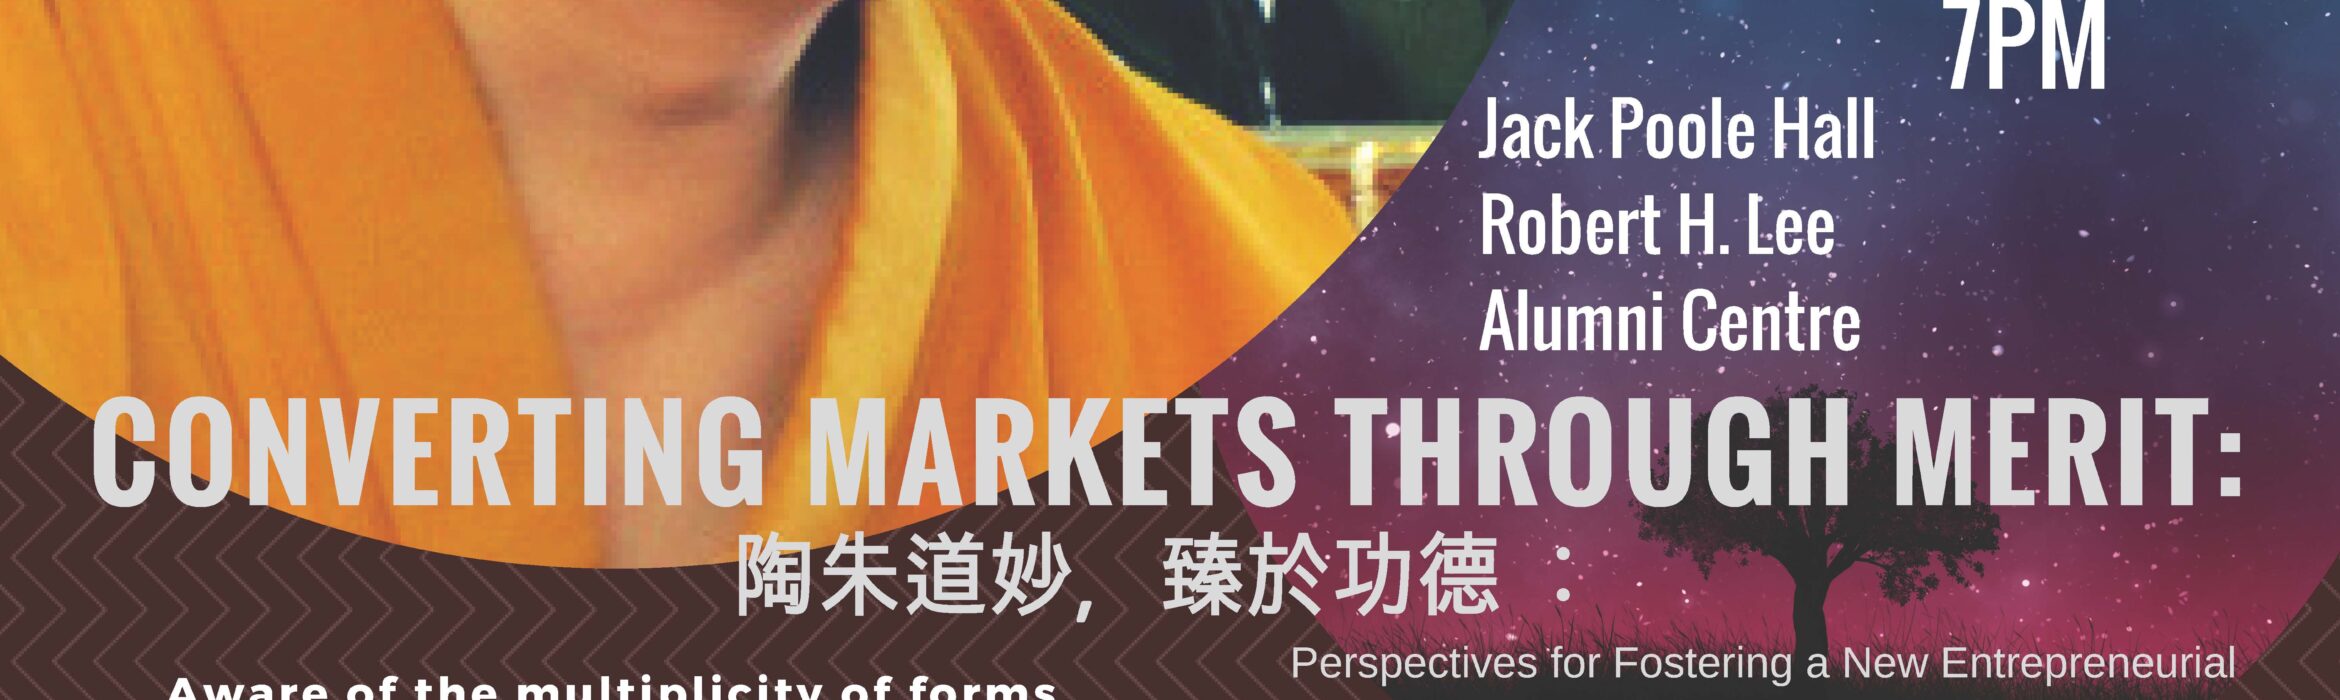 Converting Markets through Merit: Perspectives for Fostering a New Entrepreneurial Culture with Chan Buddhist Principles